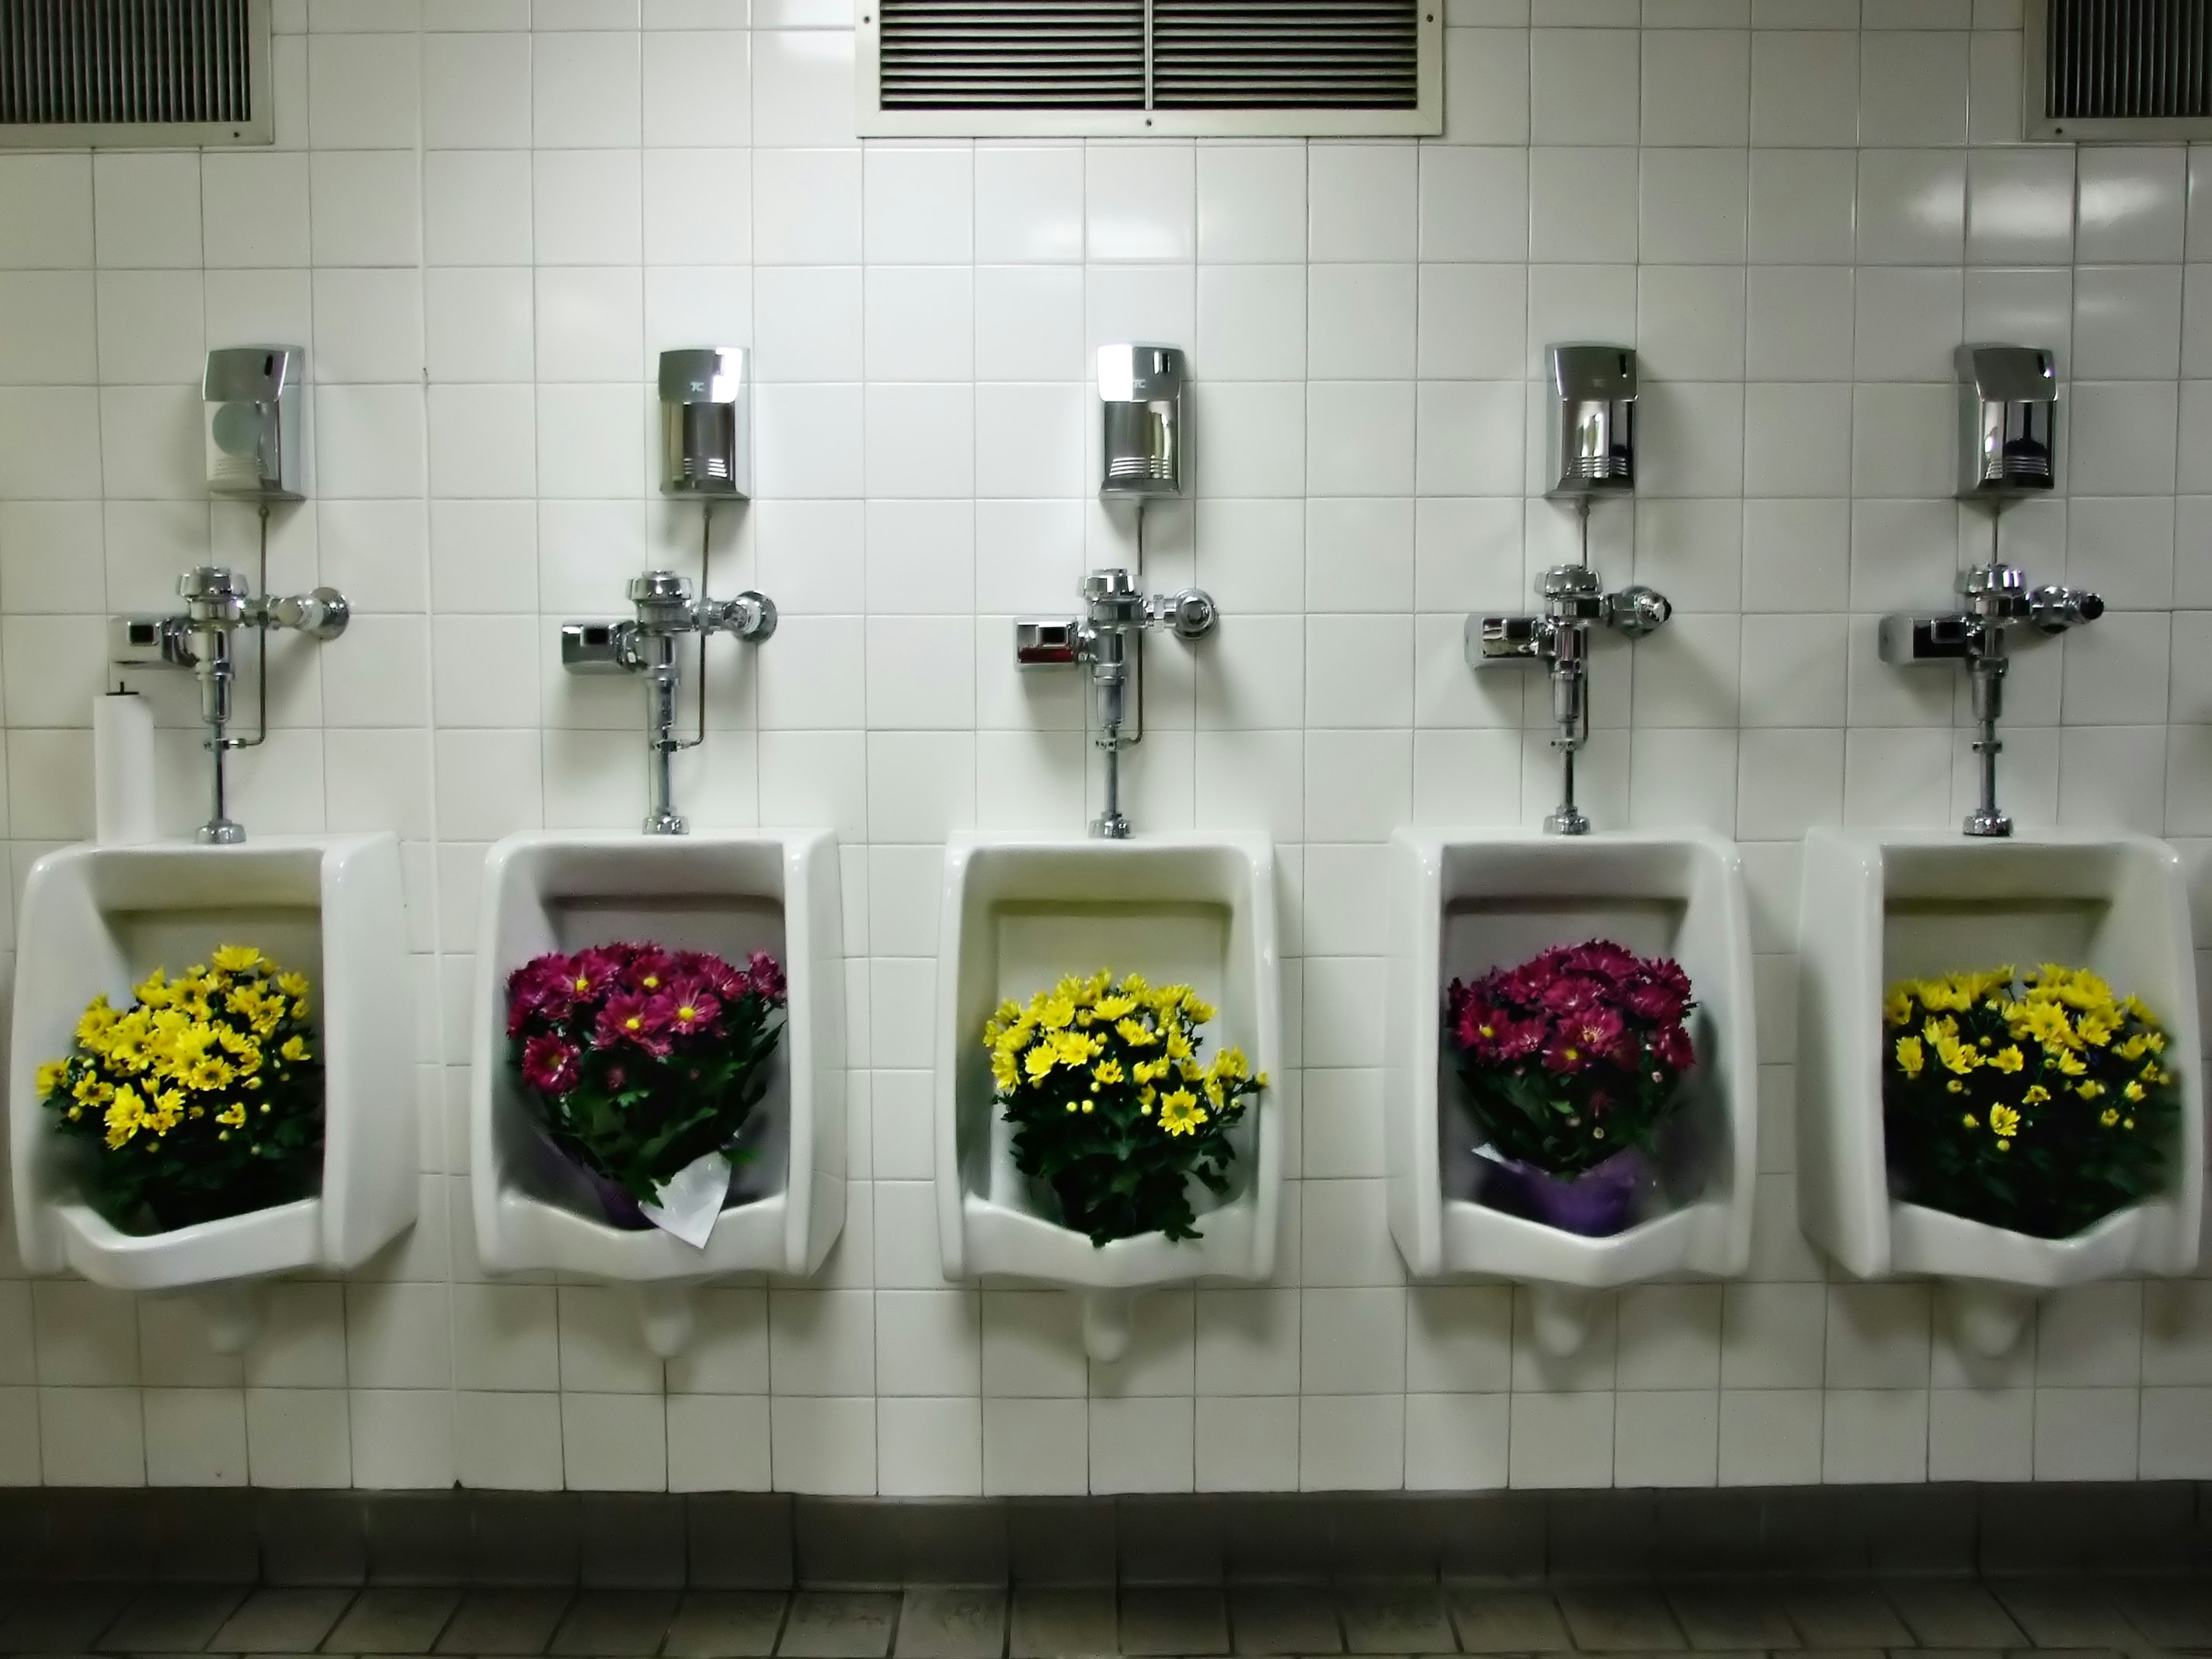 Five white urinals have been used as planters for tongue-in-cheek floral displays.